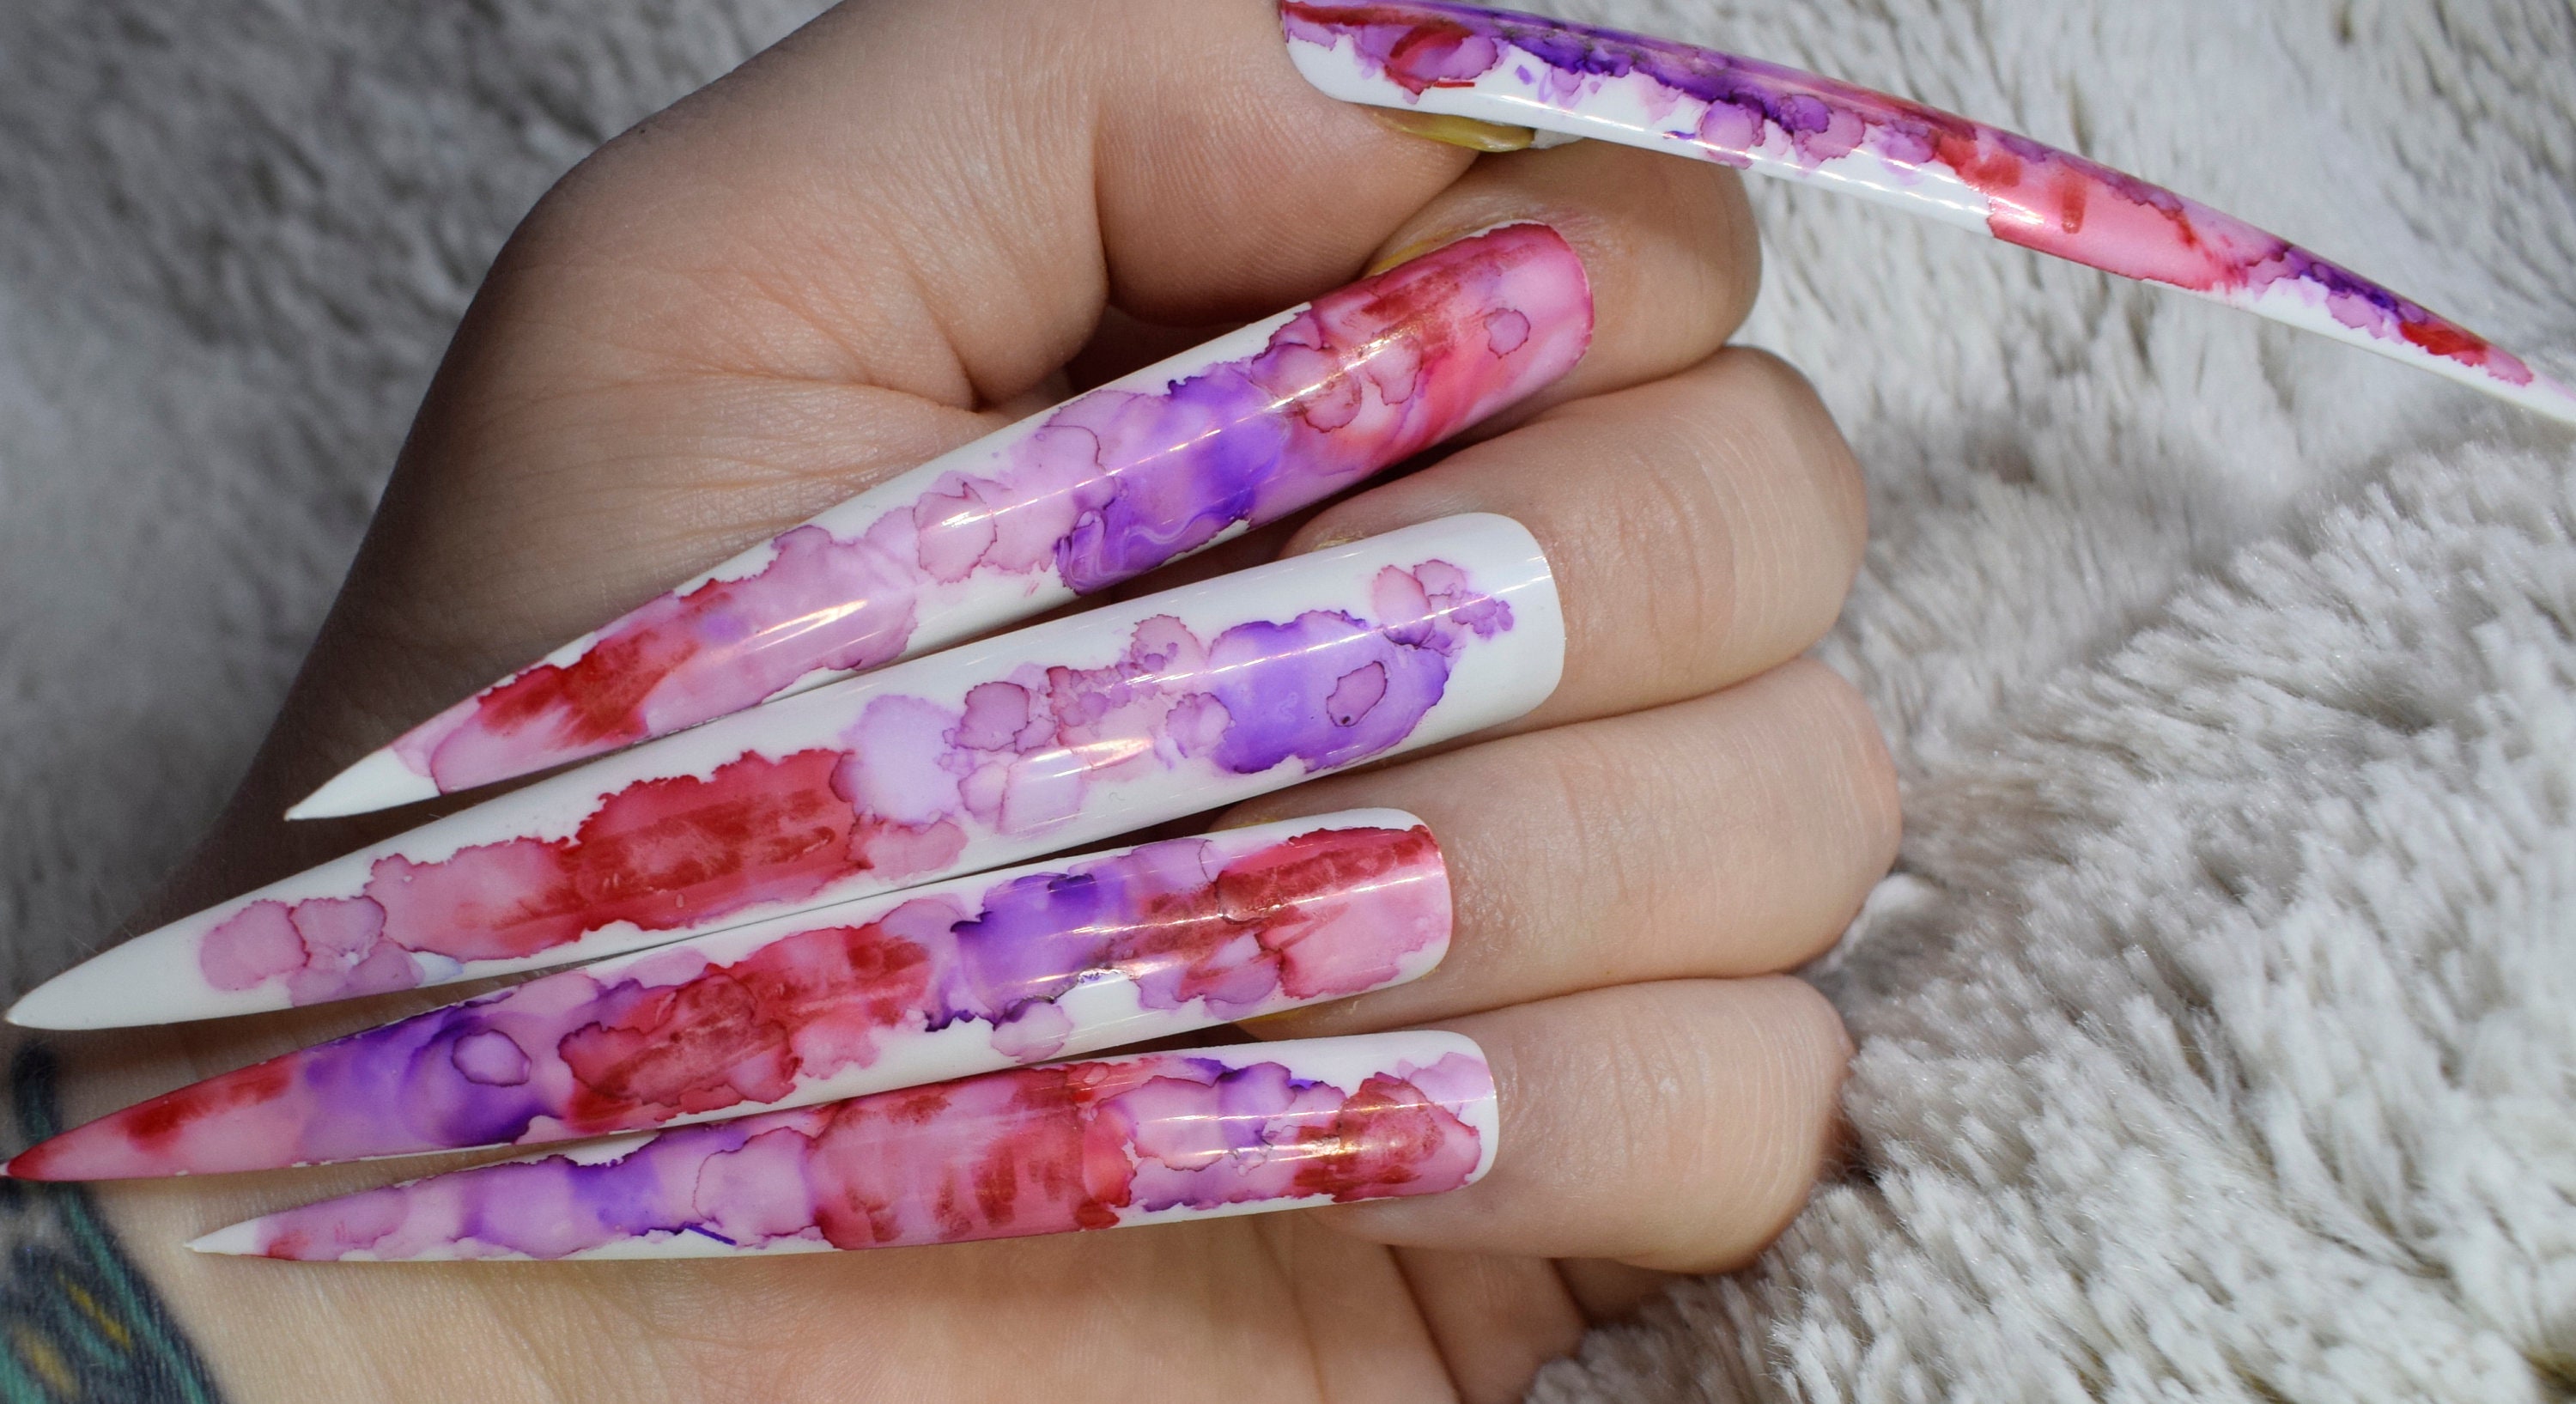 5. "5-Minute Nail Art for Long Coffin Nails" - wide 3